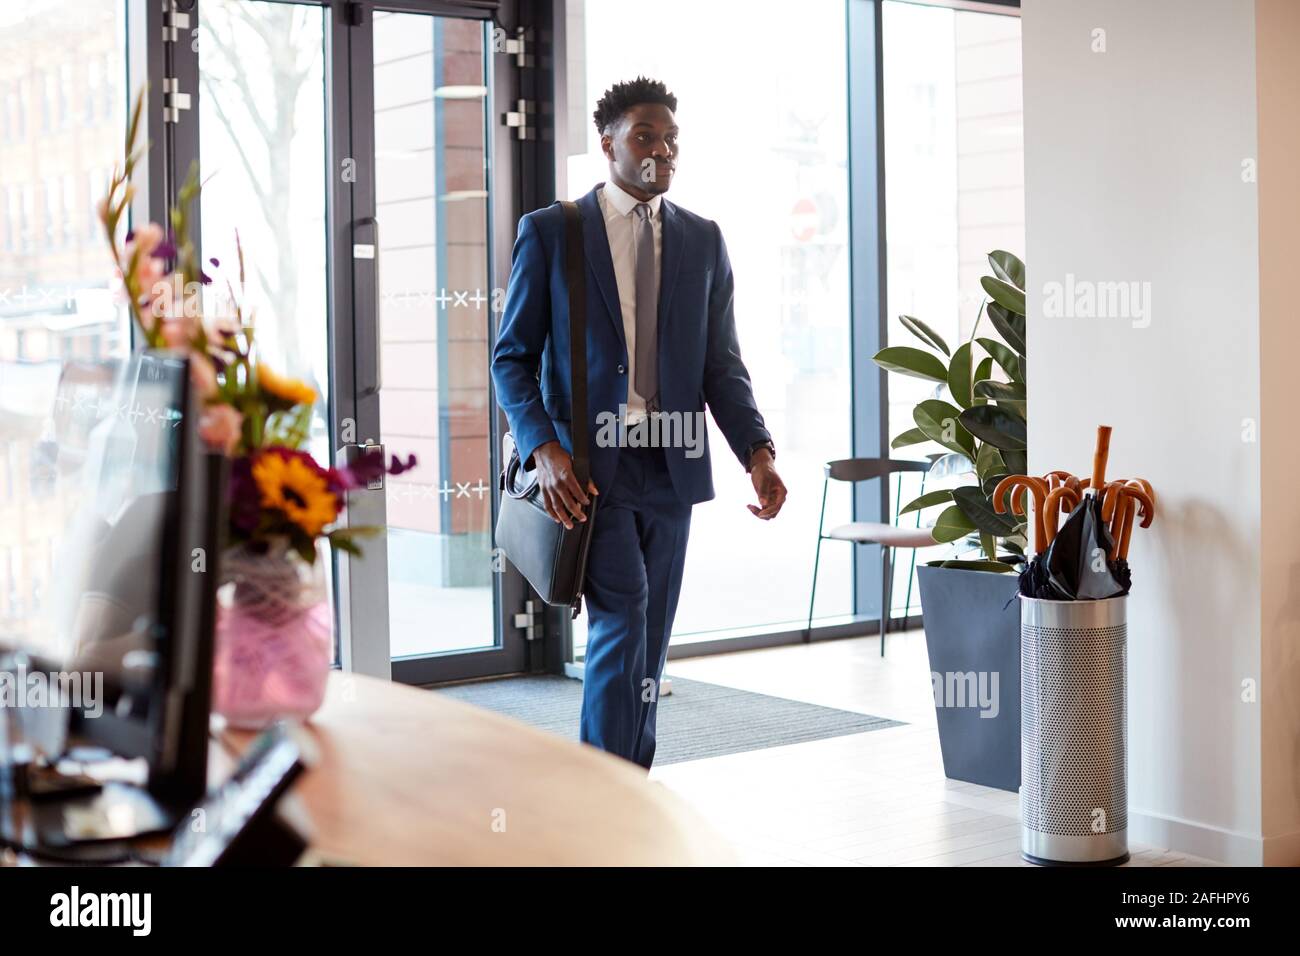 Businessman Arriving For Work At Office Walking Through Door Stock Photo